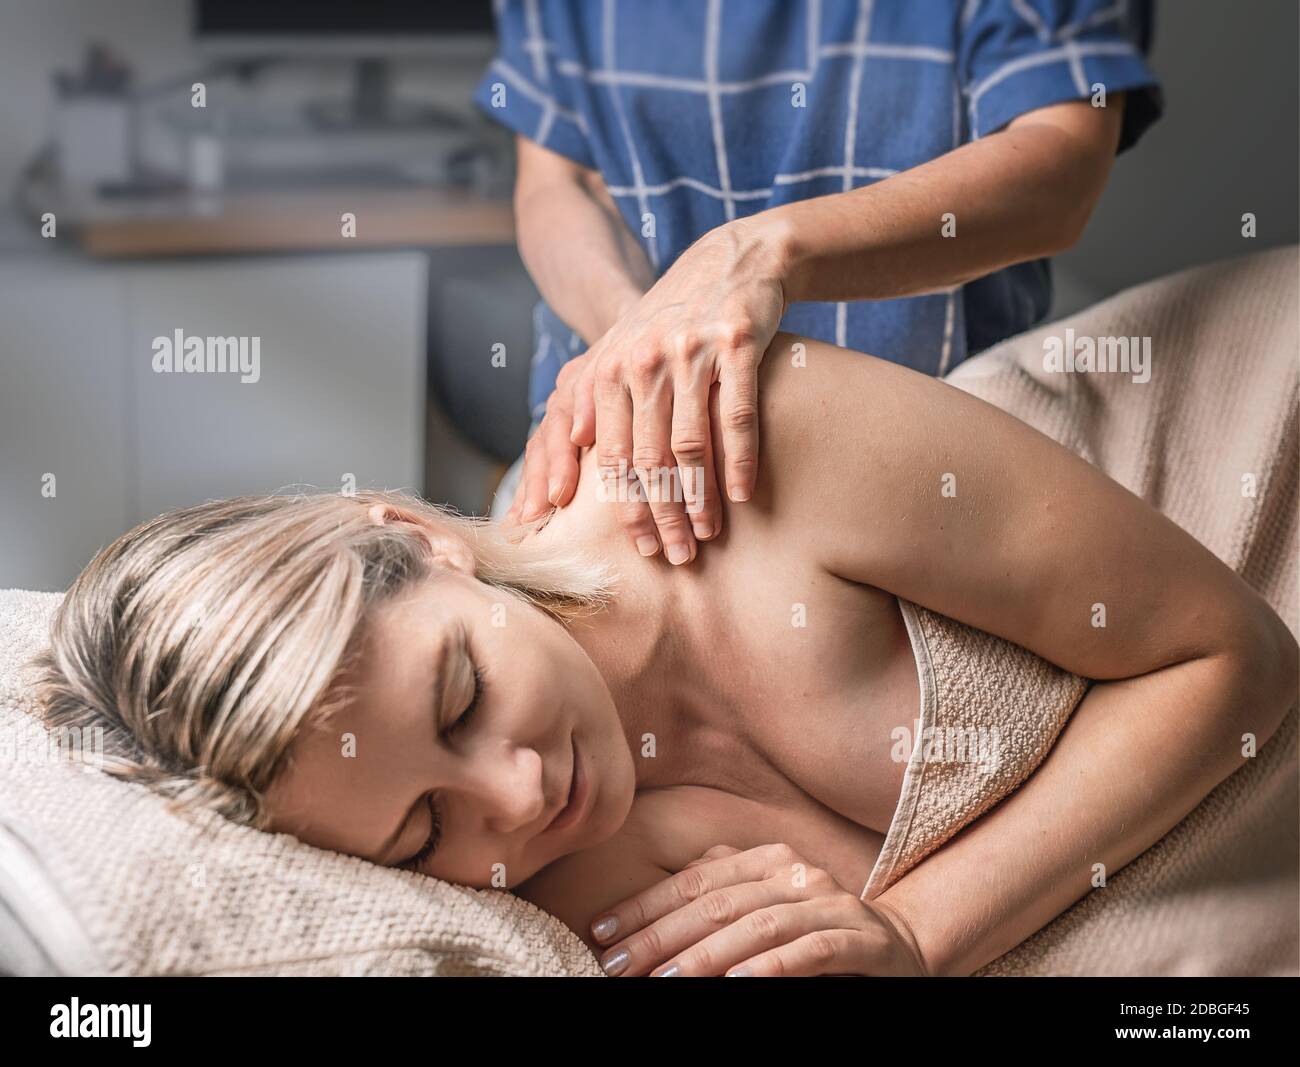 A young woman receiving massage, lay on massage bed Stock Photo